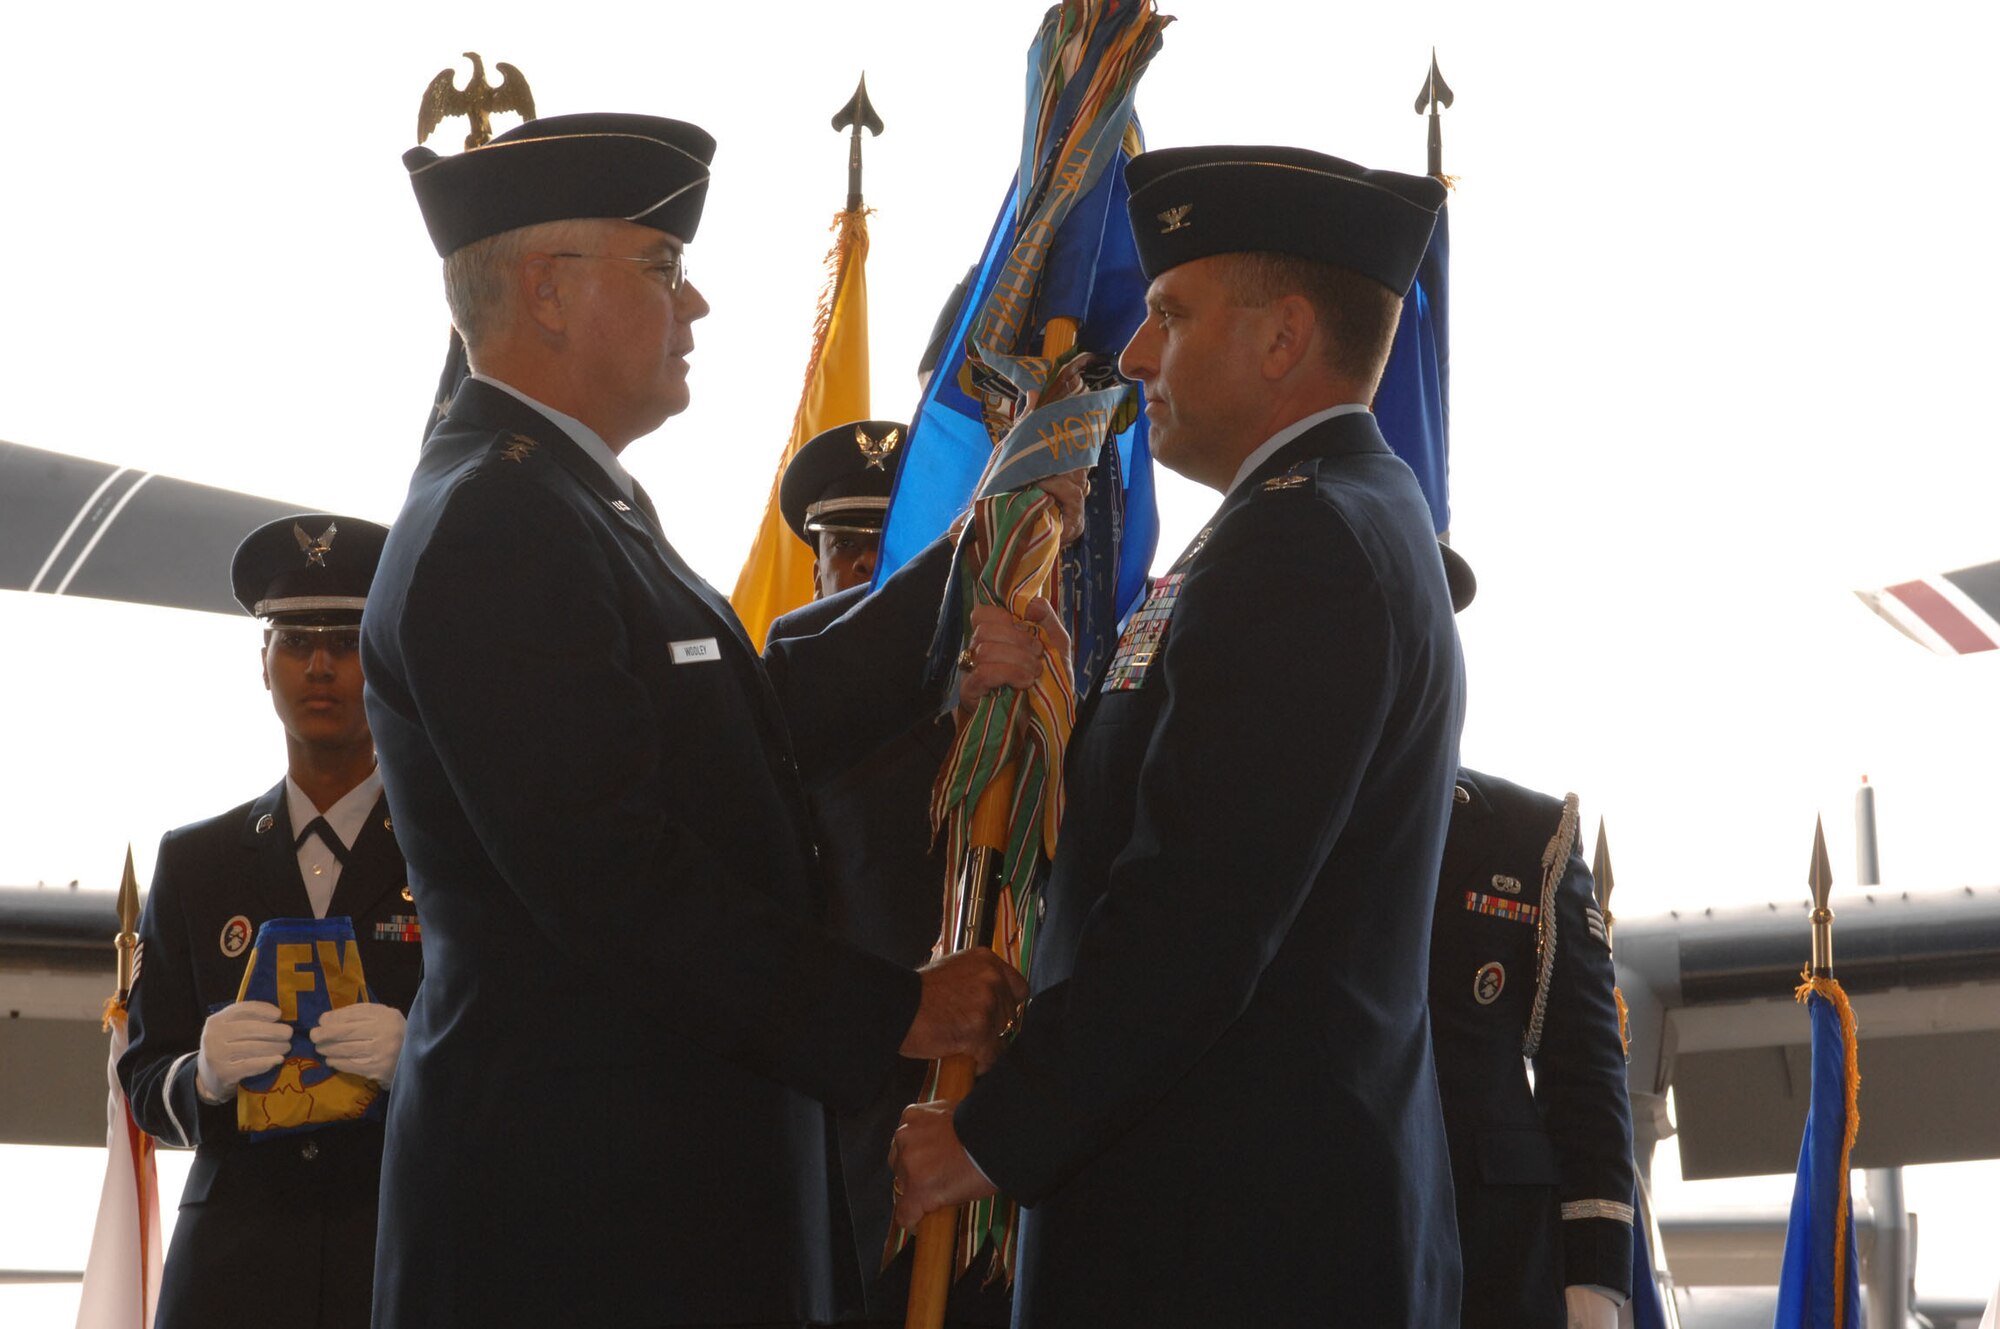 Lt. Gen. Michael W. Wooley (left), commander of Air Force Special Operations Command, passes the guidon of the newly formed 27th Special Operations Wing to the new commander of the wing Col. Tim Leahy. (U.S. Air Force photo by Airman 1st Class Evelyn Chavez)